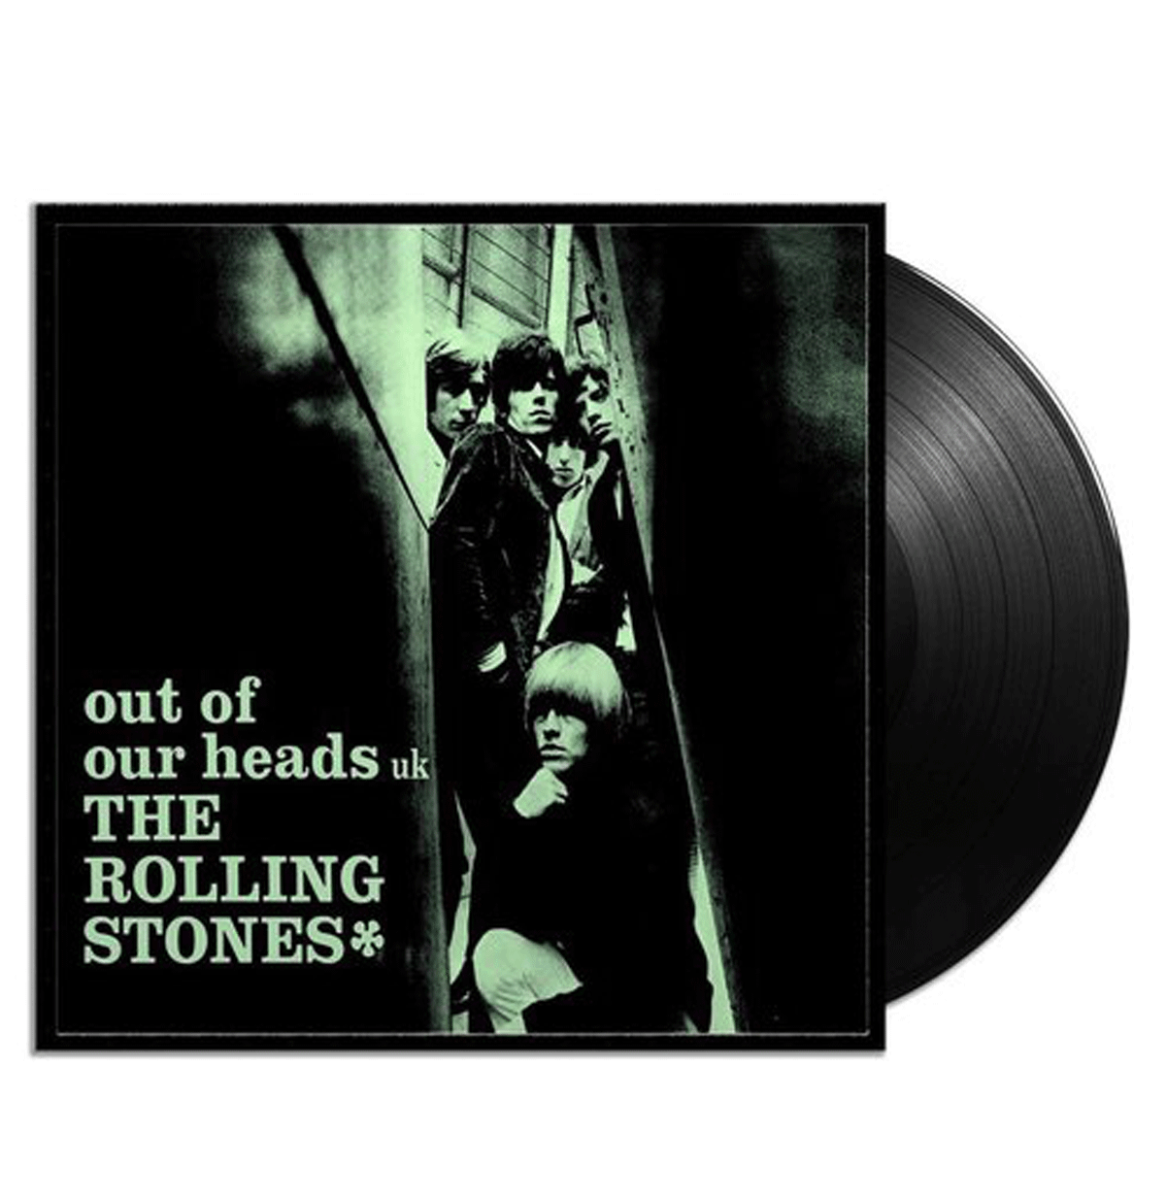 The Rolling Stones - Out Of Our Heads UK LP